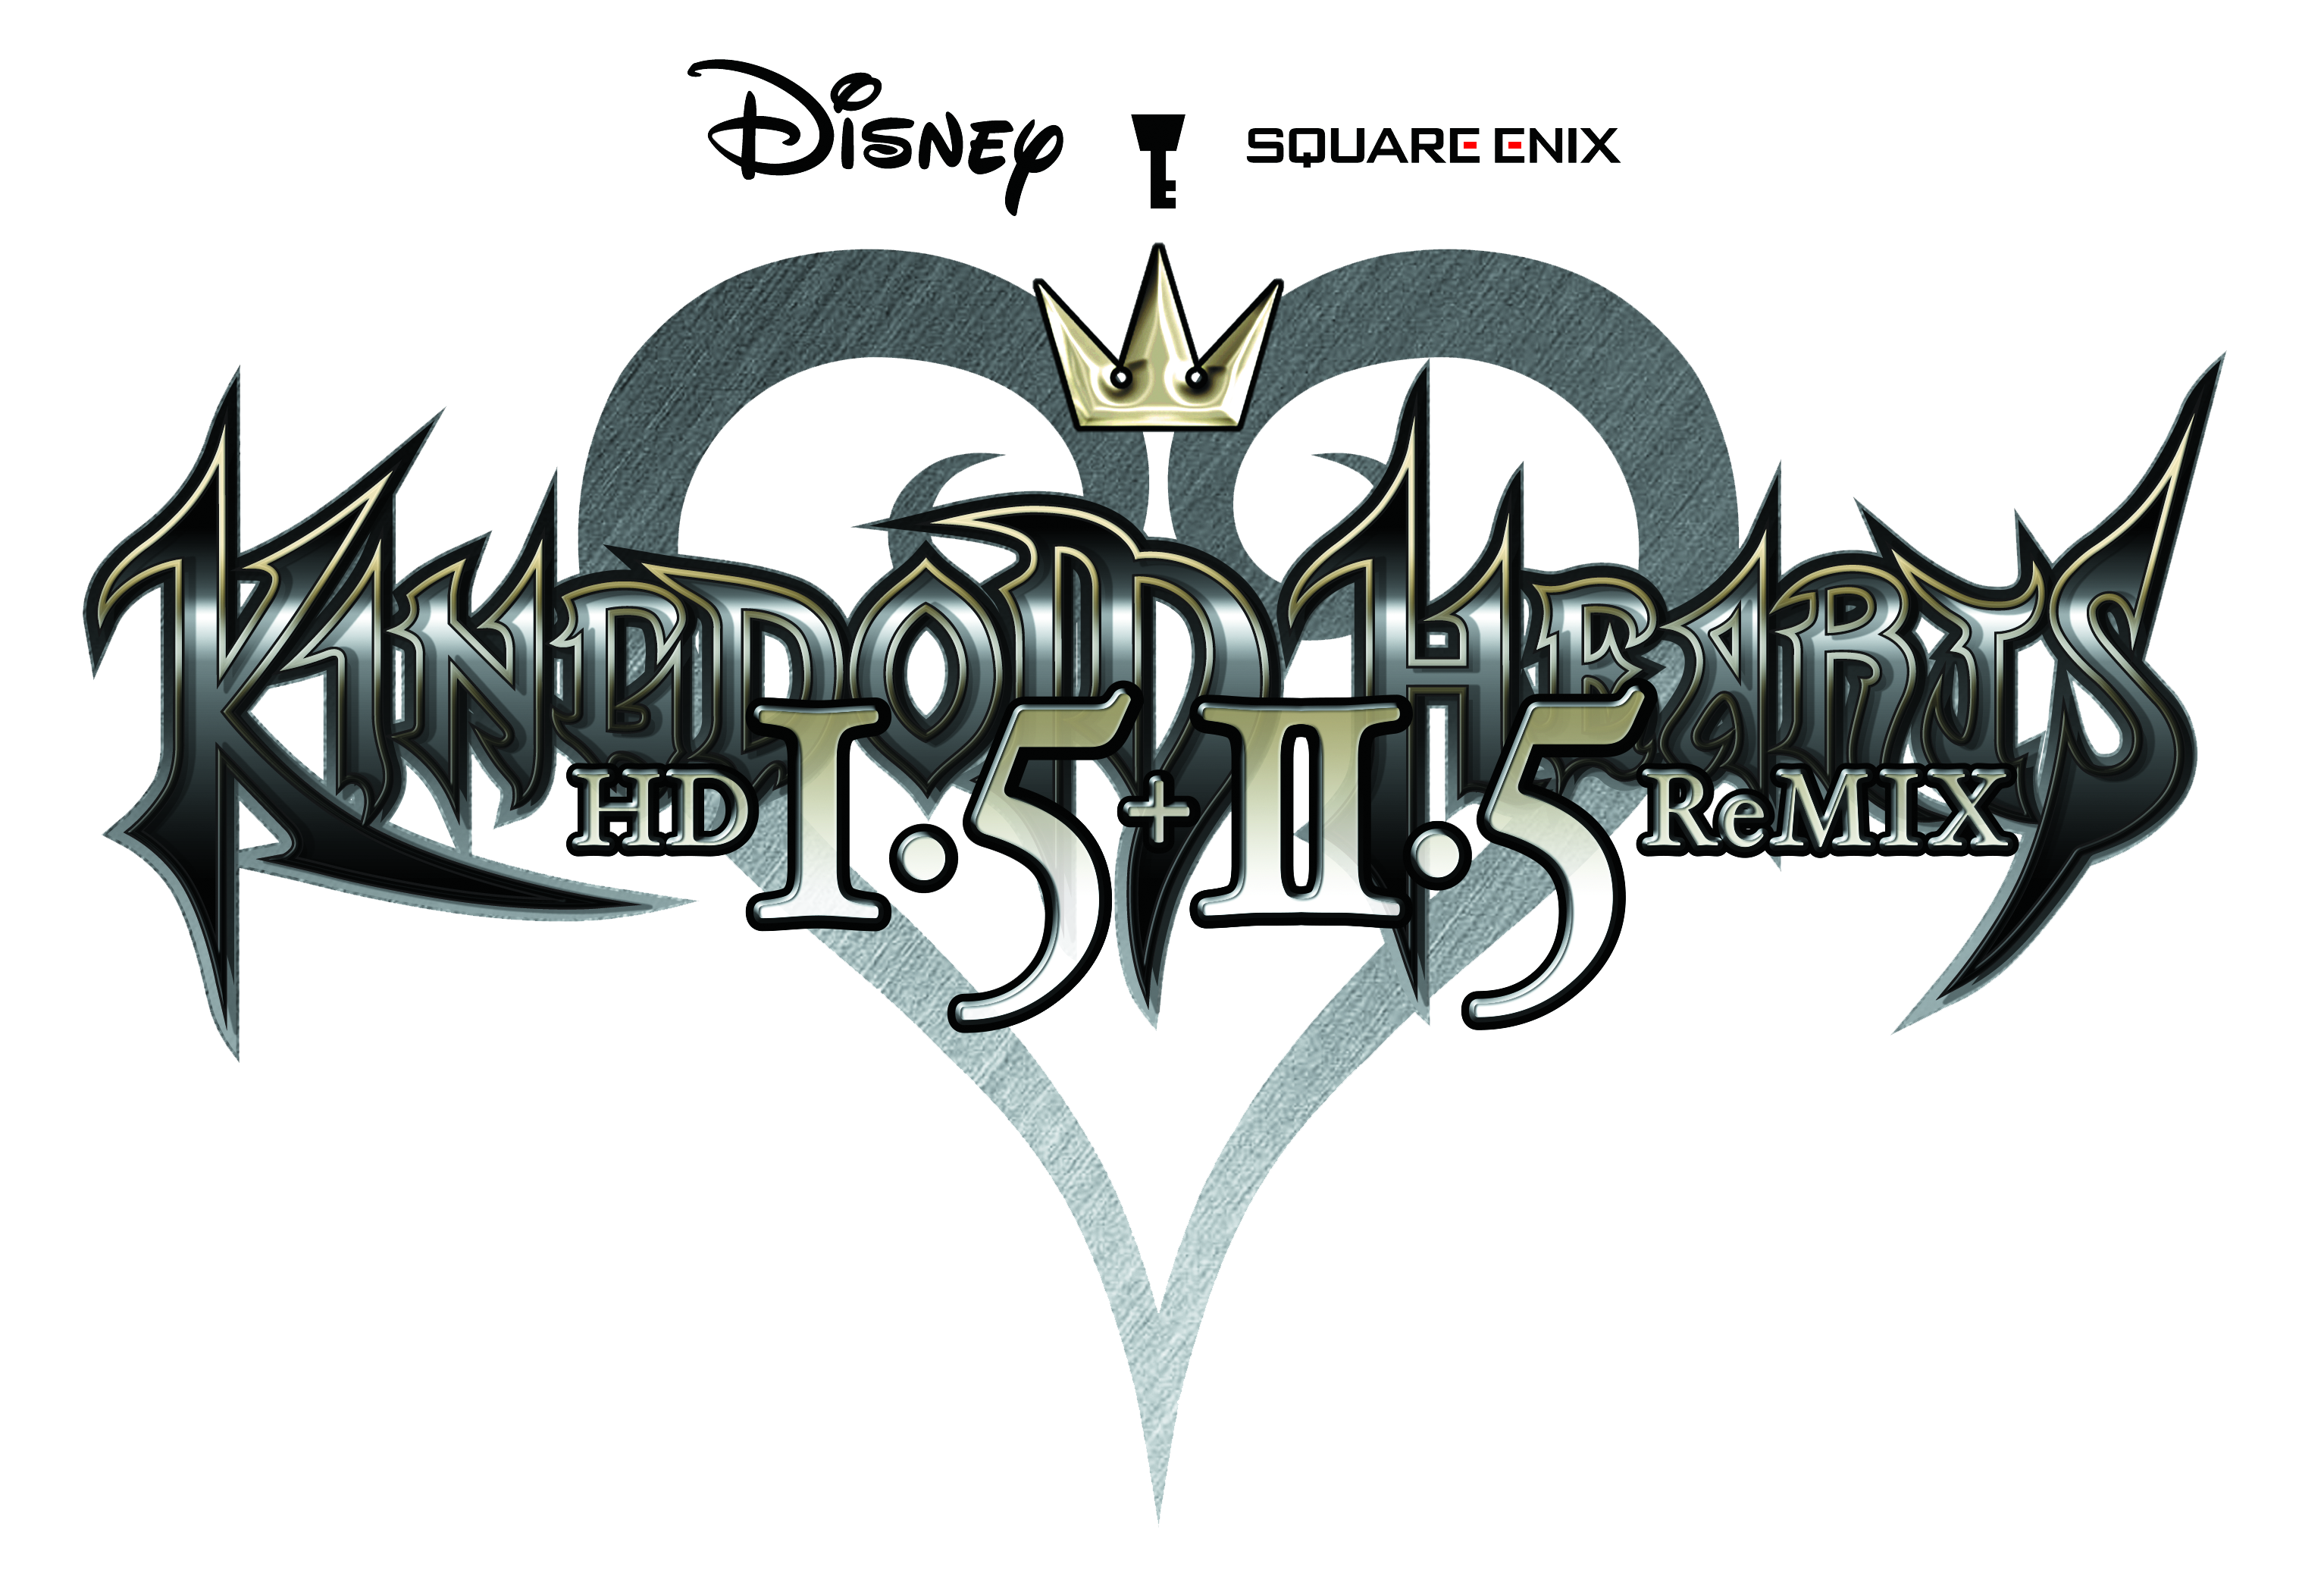 Square Enix Europe offering exclusive Kingdom Hearts HD 2.5 ReMIX